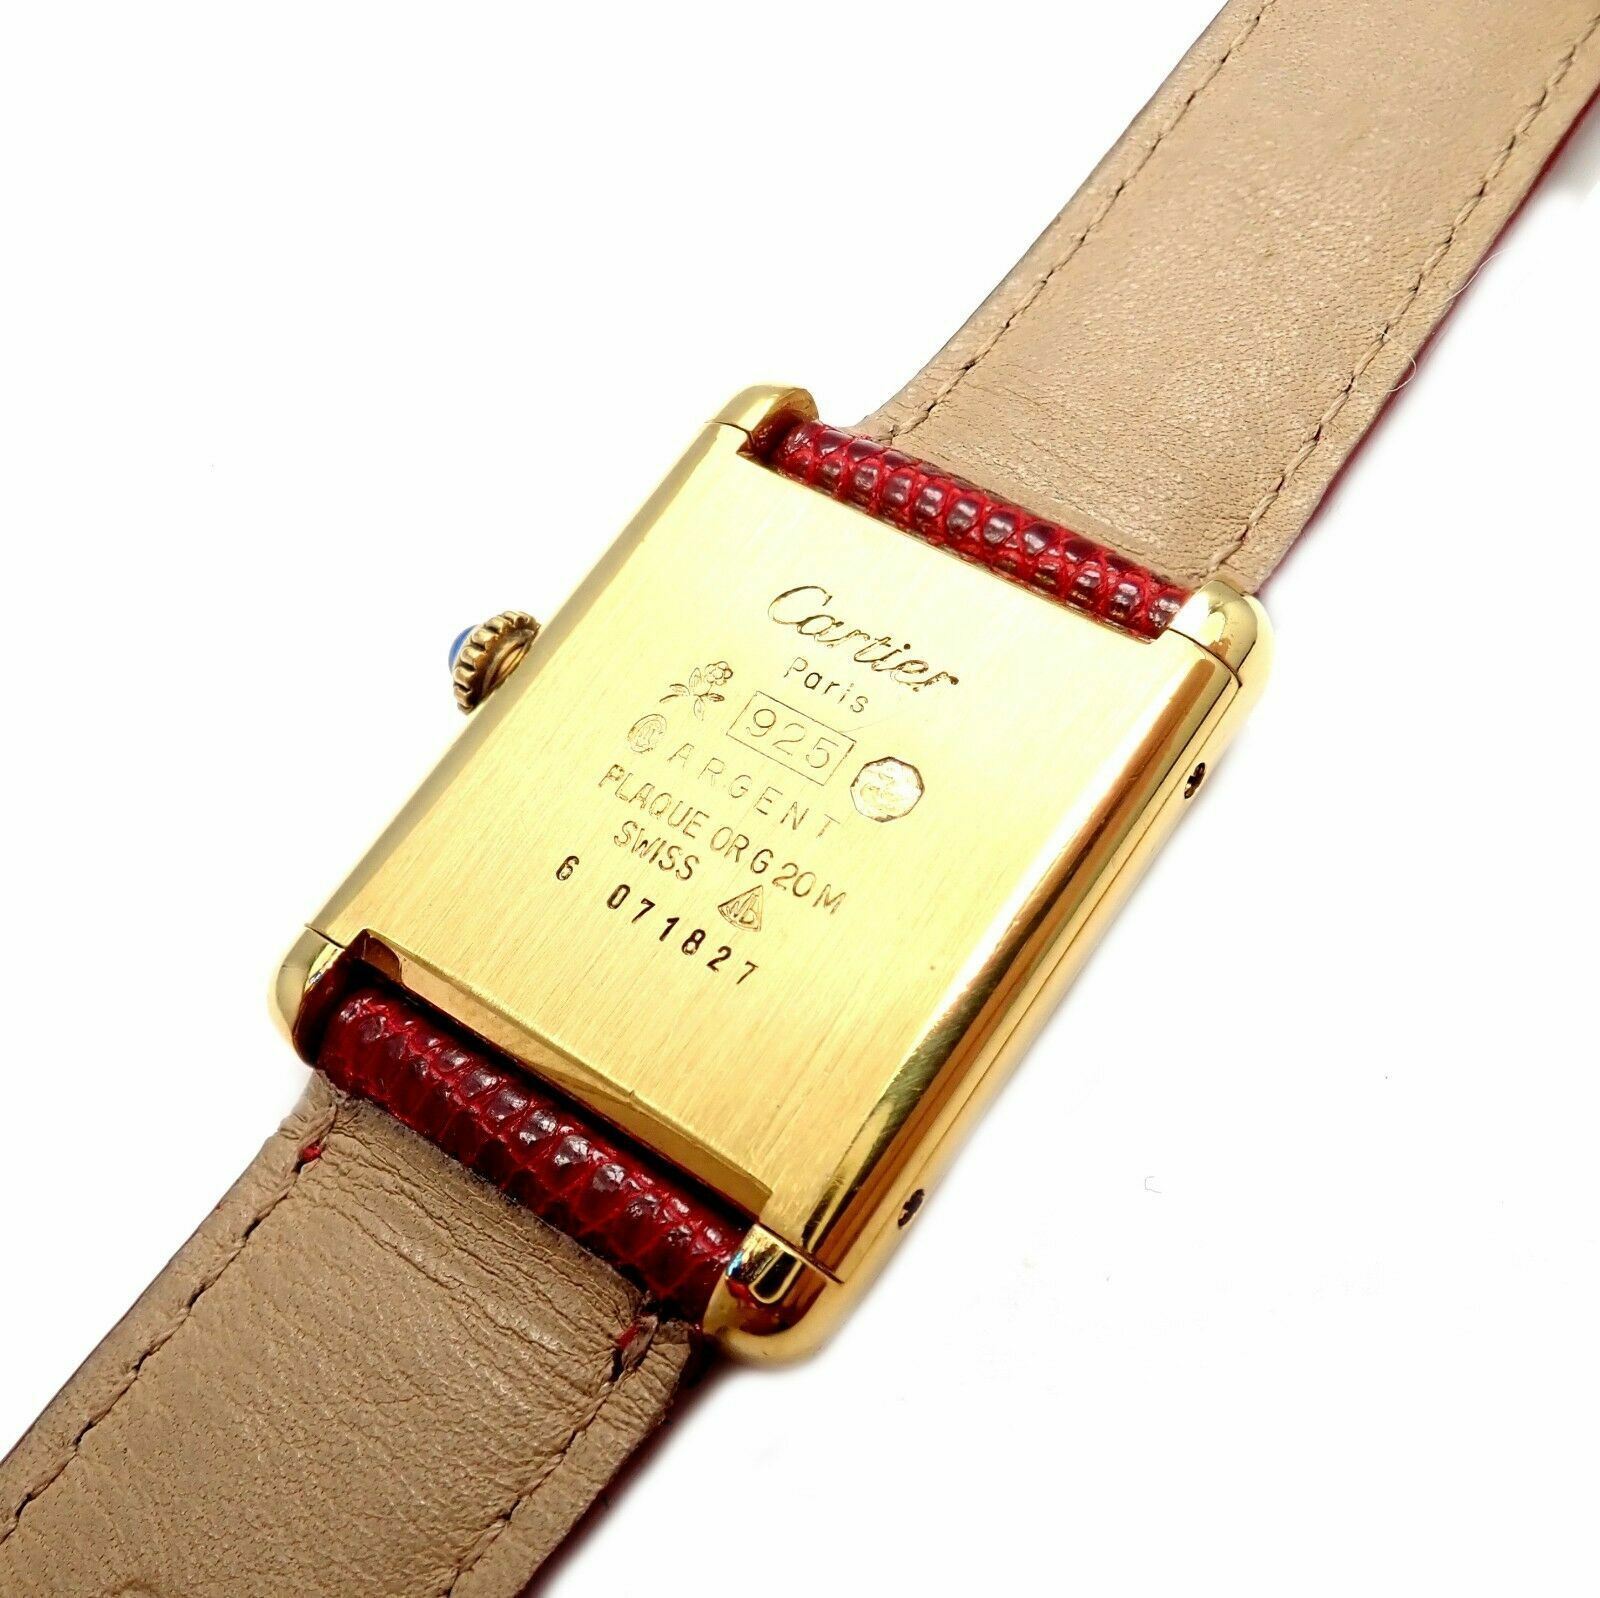 Cartier Jewelry & Watches:Watches, Parts & Accessories:Watches:Wristwatches Authentic! Cartier Tank Vermeil 925 Unisex Manual Wind Watch